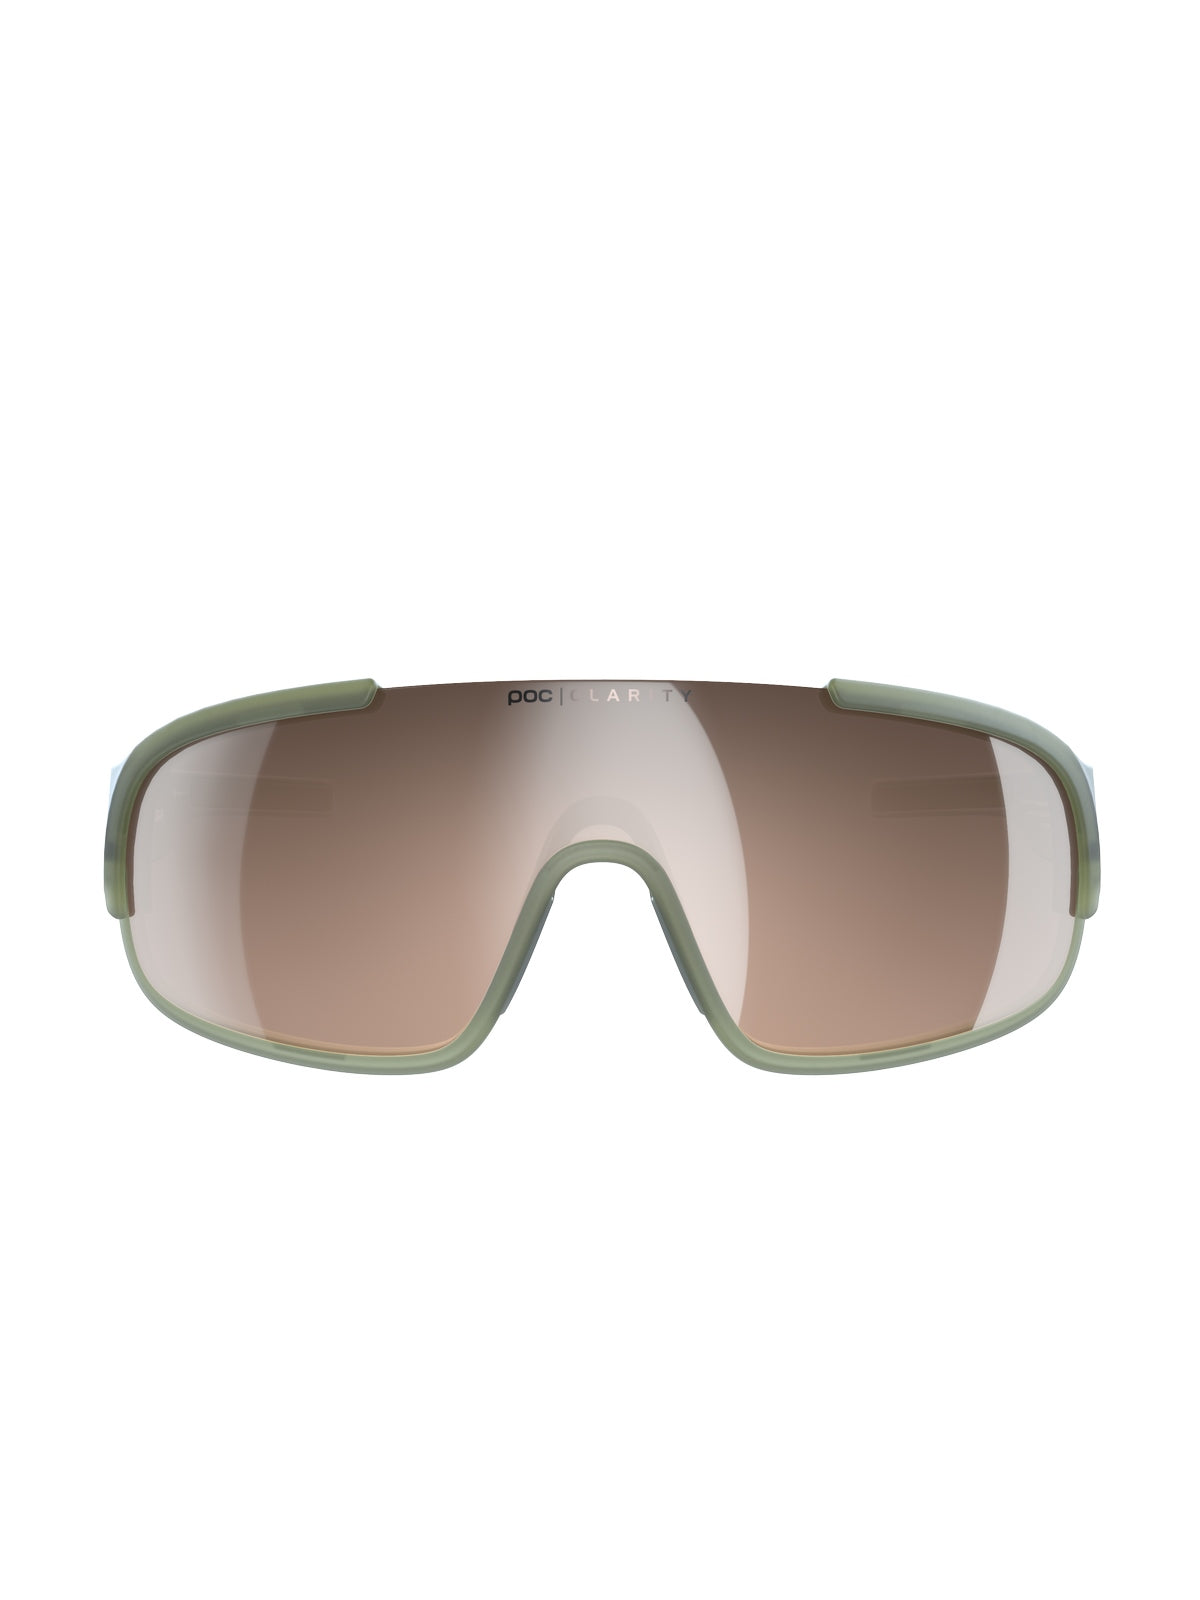 Okulary POC CRAVE - Epid. Green Translucent - Clarity Traul | Brown/Silver Mirror Cat 2